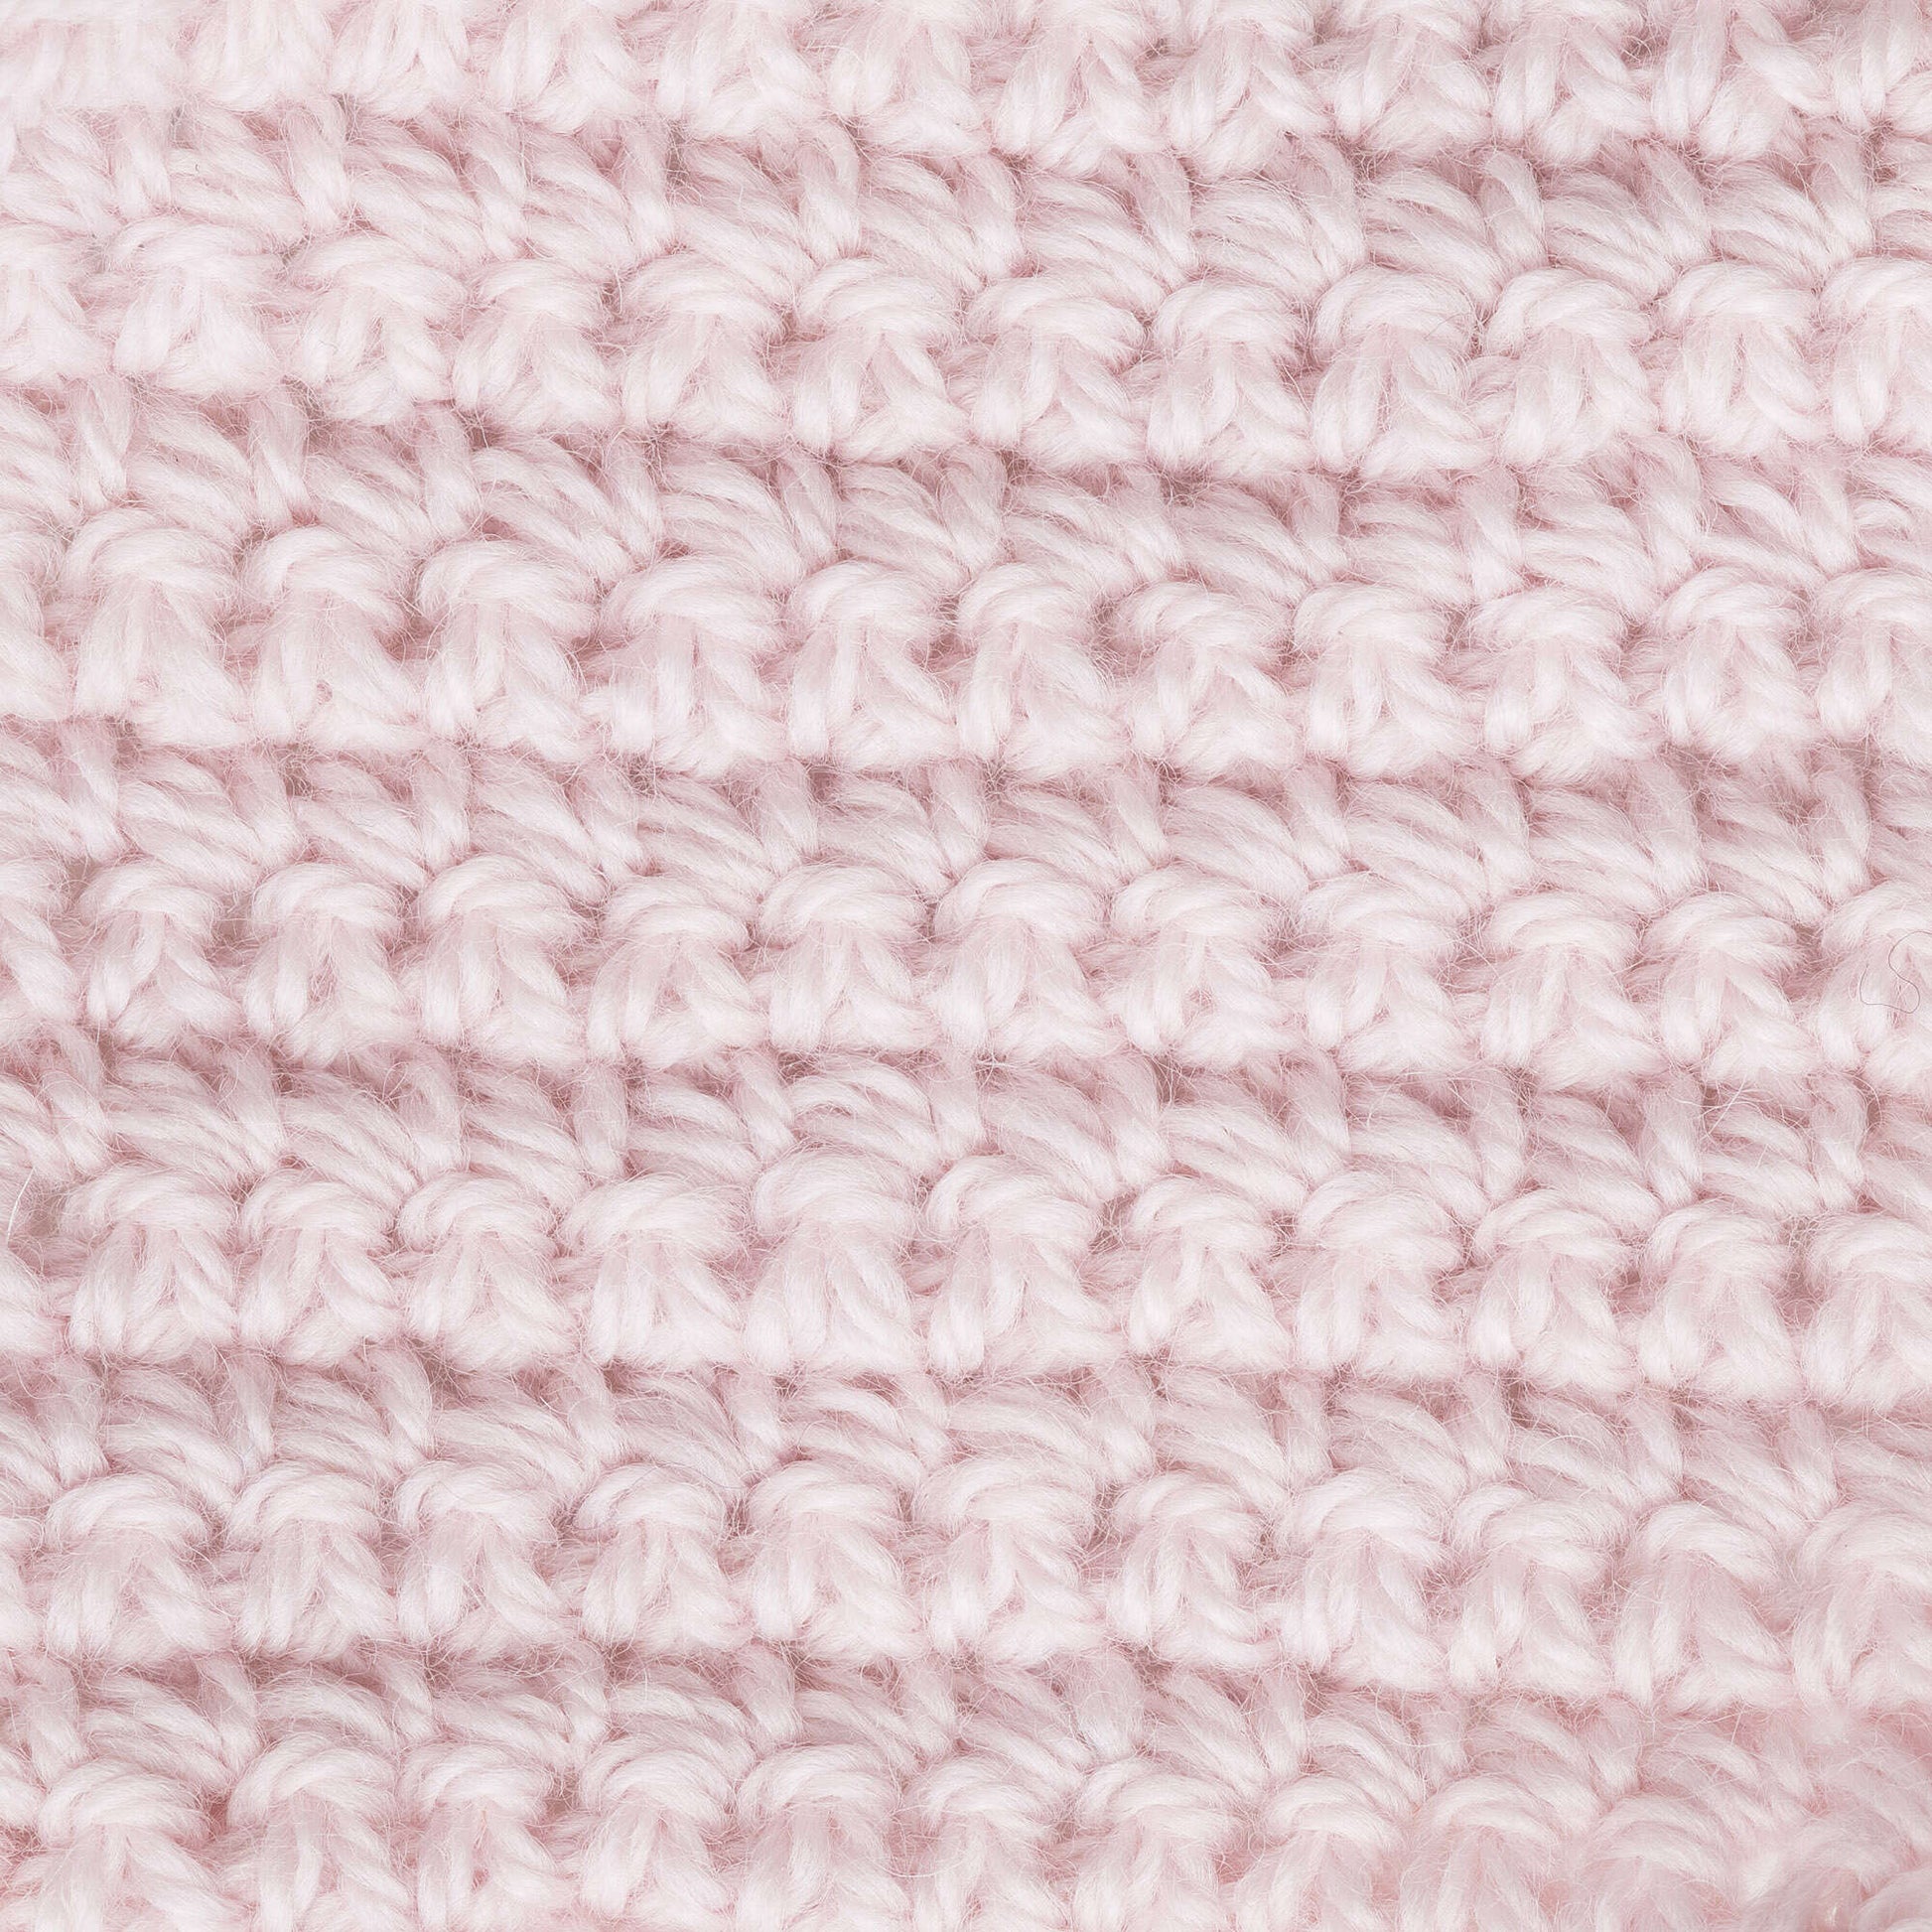 Patons Classic Wool Worsted Yarn - Discontinued Shades Powdery Pink